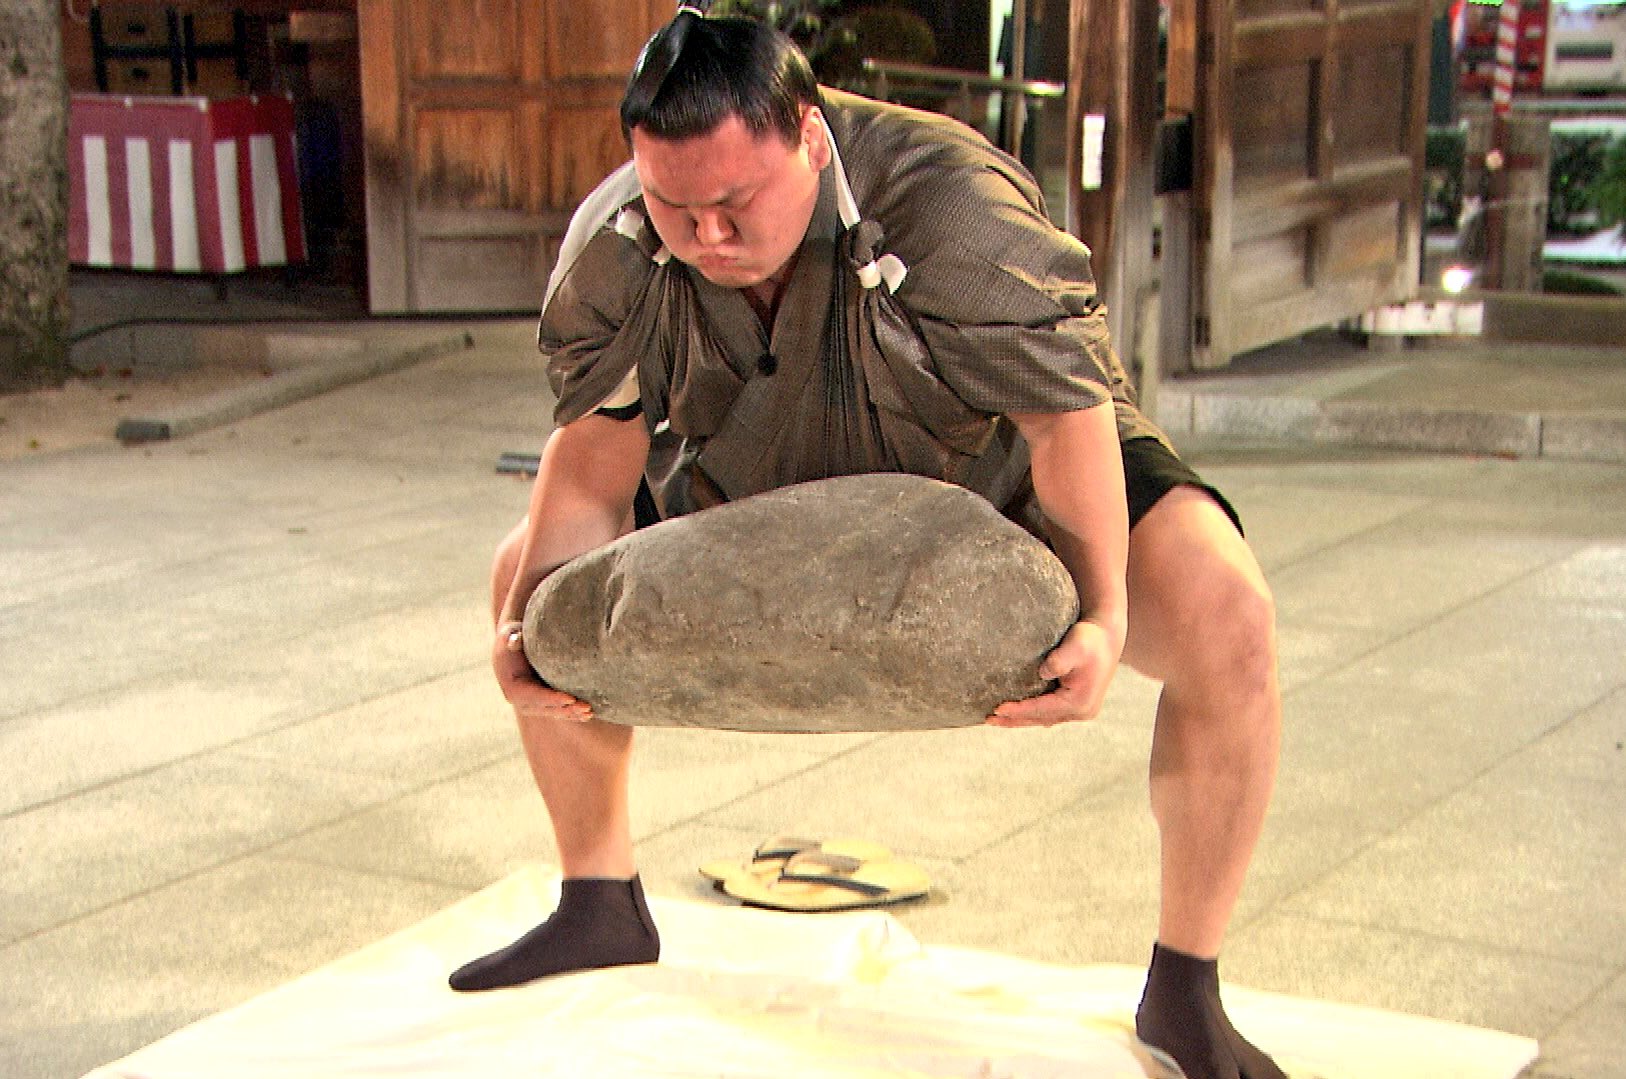 A sumo wrestler is lifting a stone.